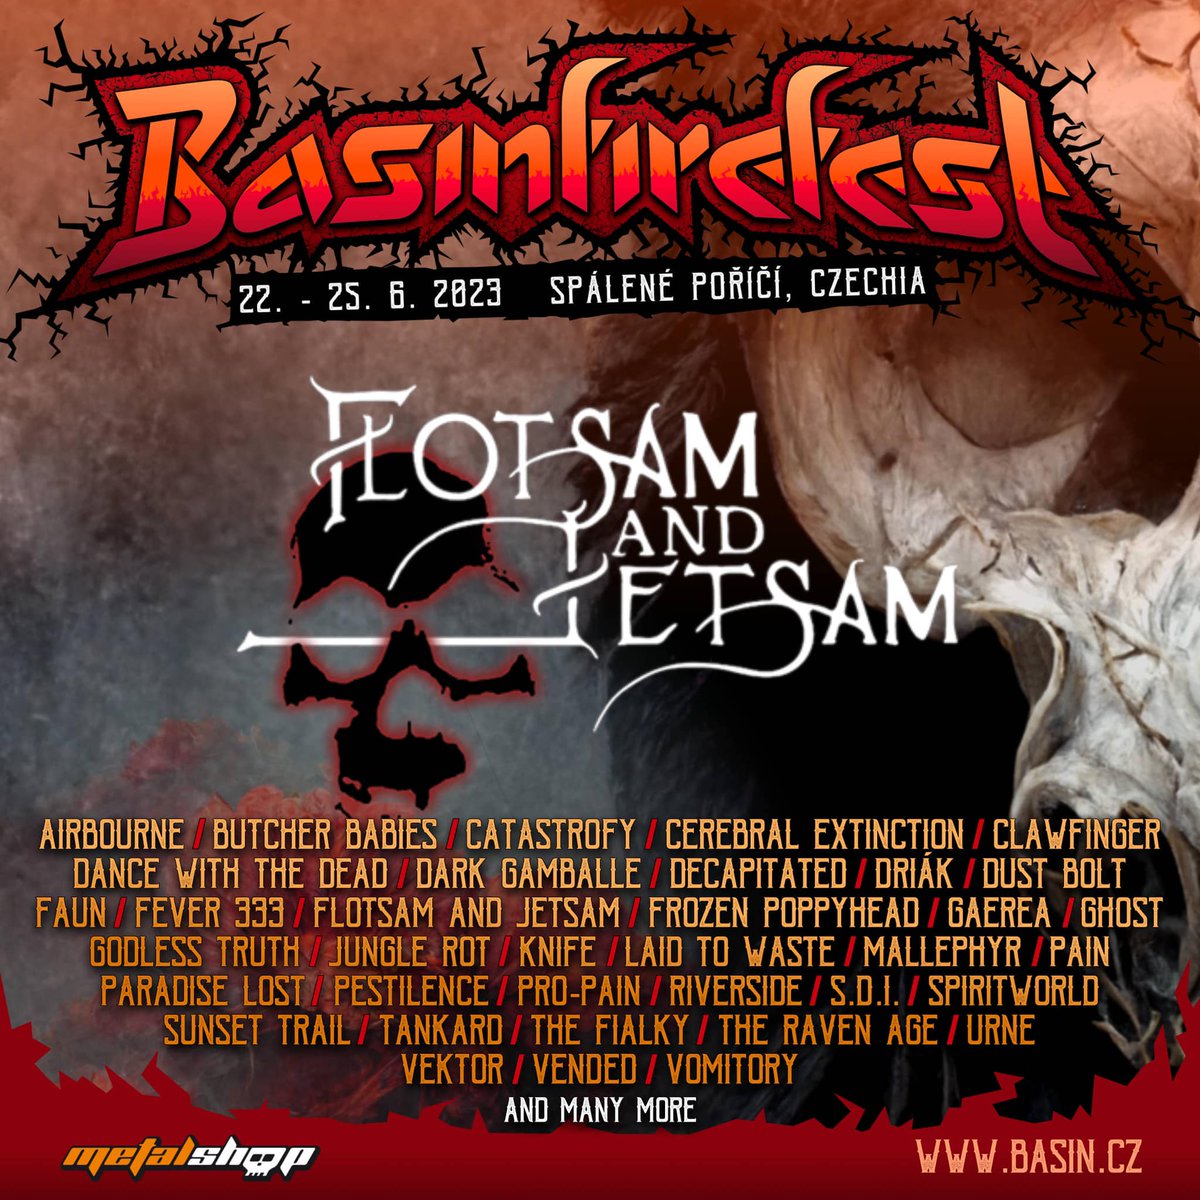 We are honored to be headlining the @Basinfirefest in the Czech Republic in June! Details are below and we look forward to seeing you all! DATES: June 22-25, 2023 CITY, COUNTRY: Spalene Porici, Czech Republic Tickets: basin.cz/en/tickets/det… #FTD #FlotzTilDeath #FlotsamAndJetsam